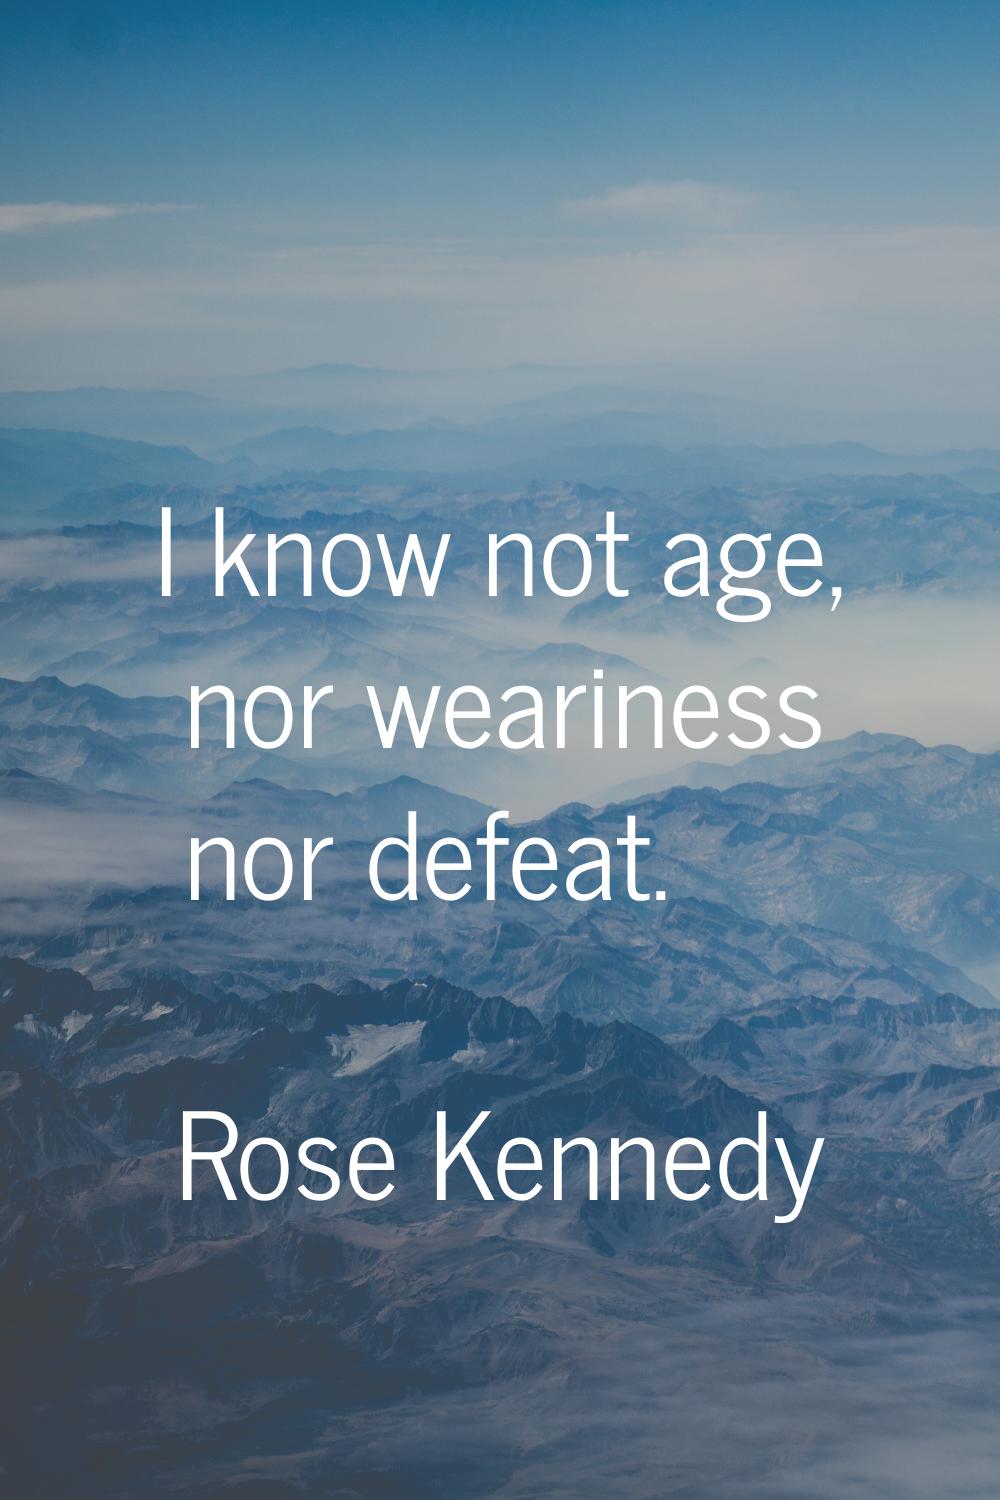 I know not age, nor weariness nor defeat.